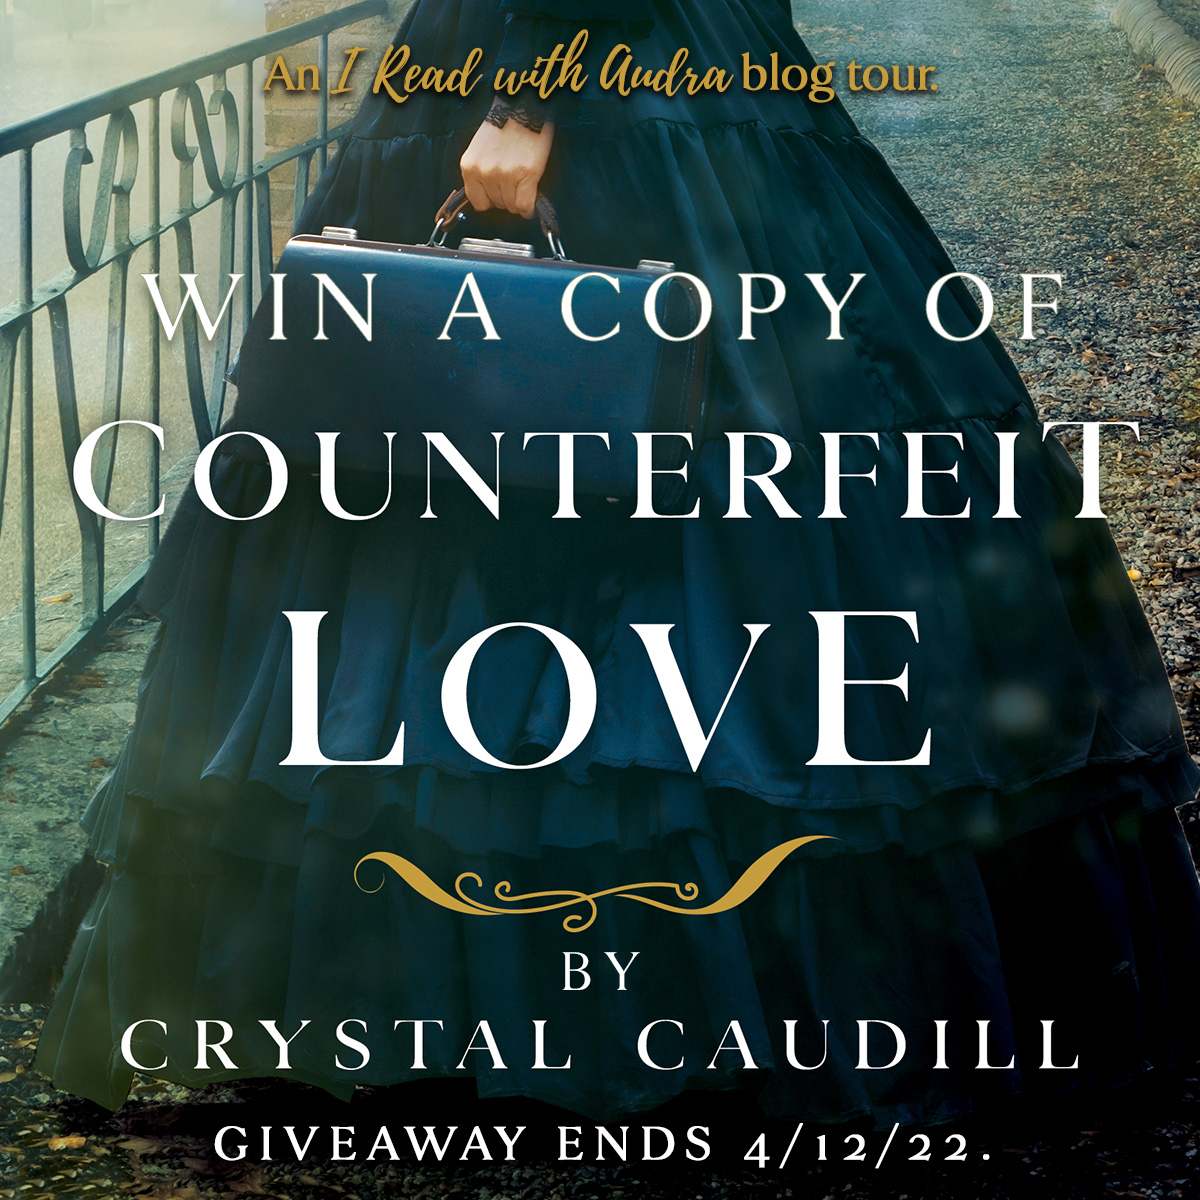 Counterfeit Love giveaway